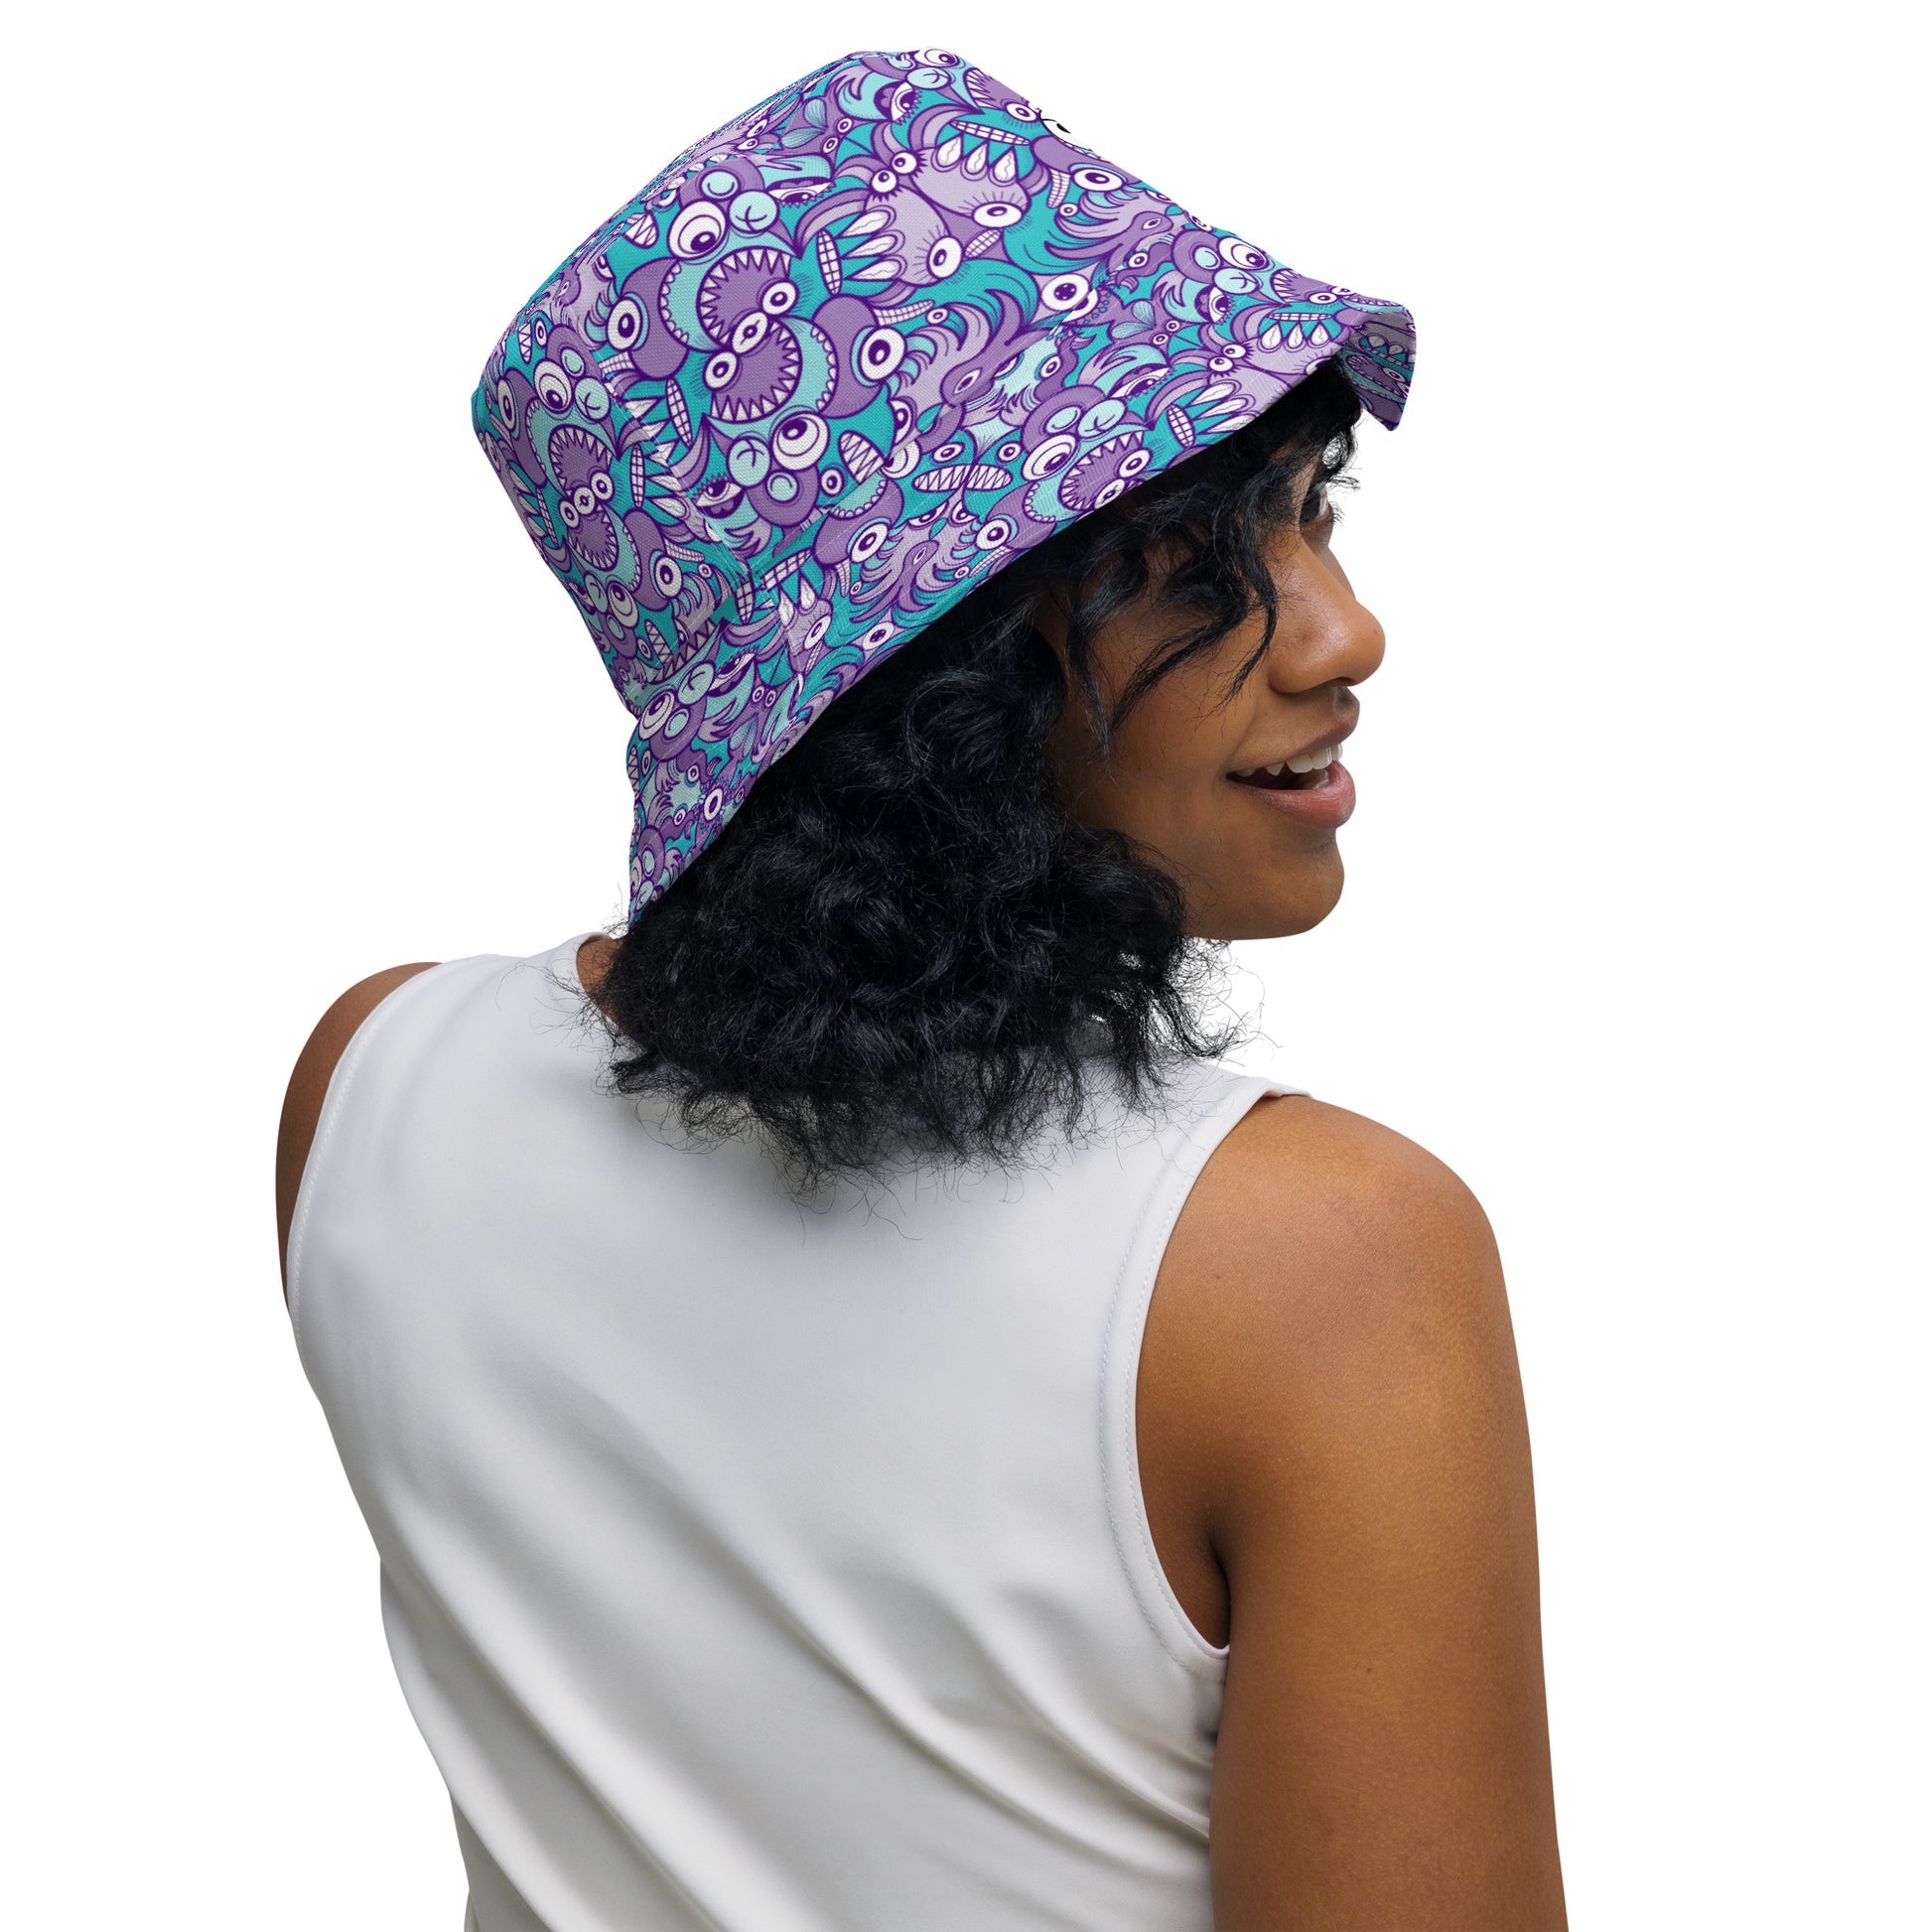 Planet 5: Aquatic Creatures from the Doodles of the Galaxy - Reversible Bucket Hat. Side view